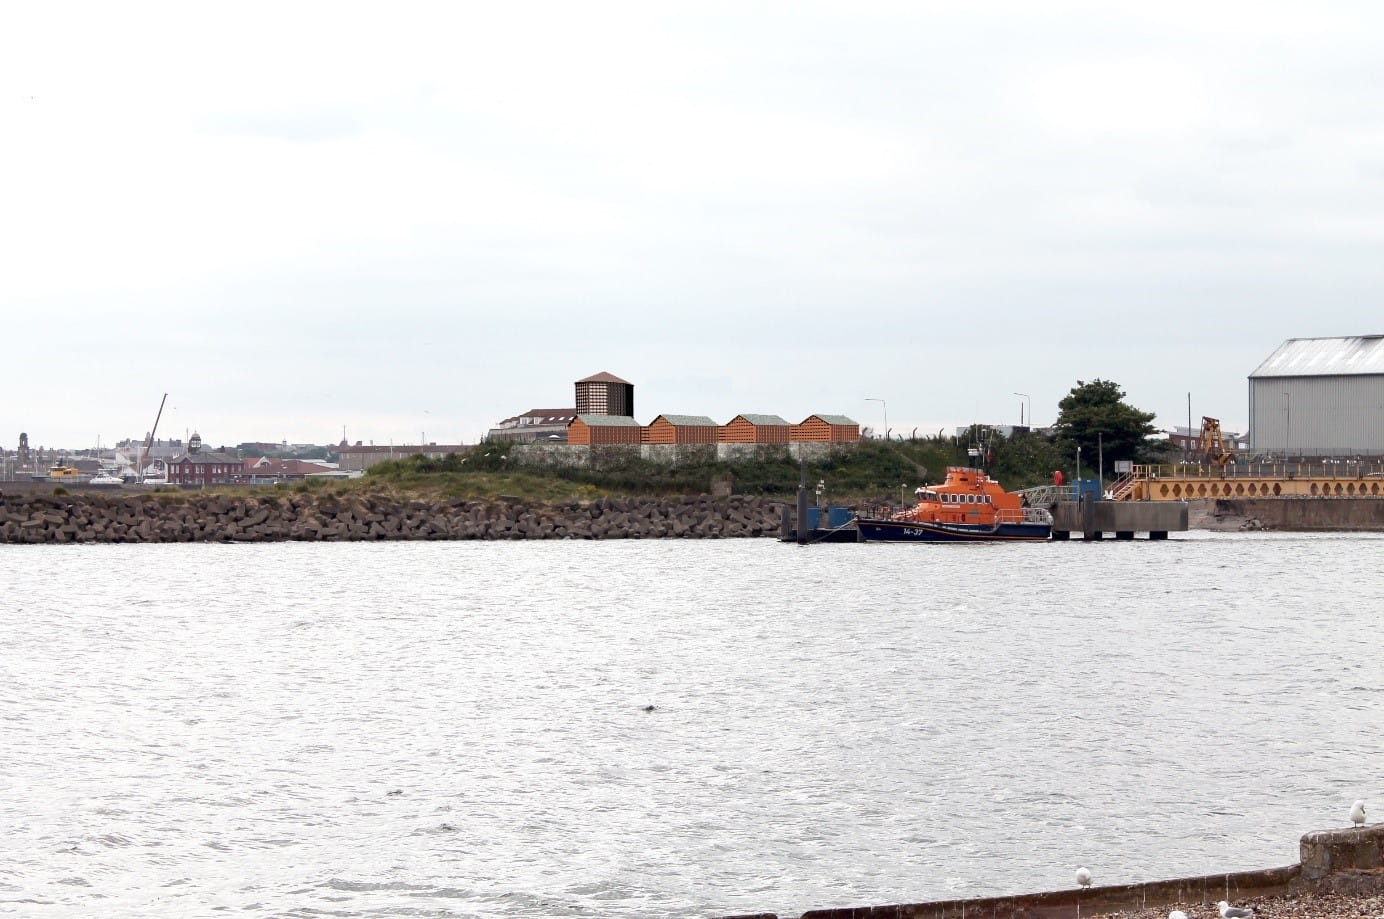 View of the artificial nesting structures from the Town Wall in Hartlepool